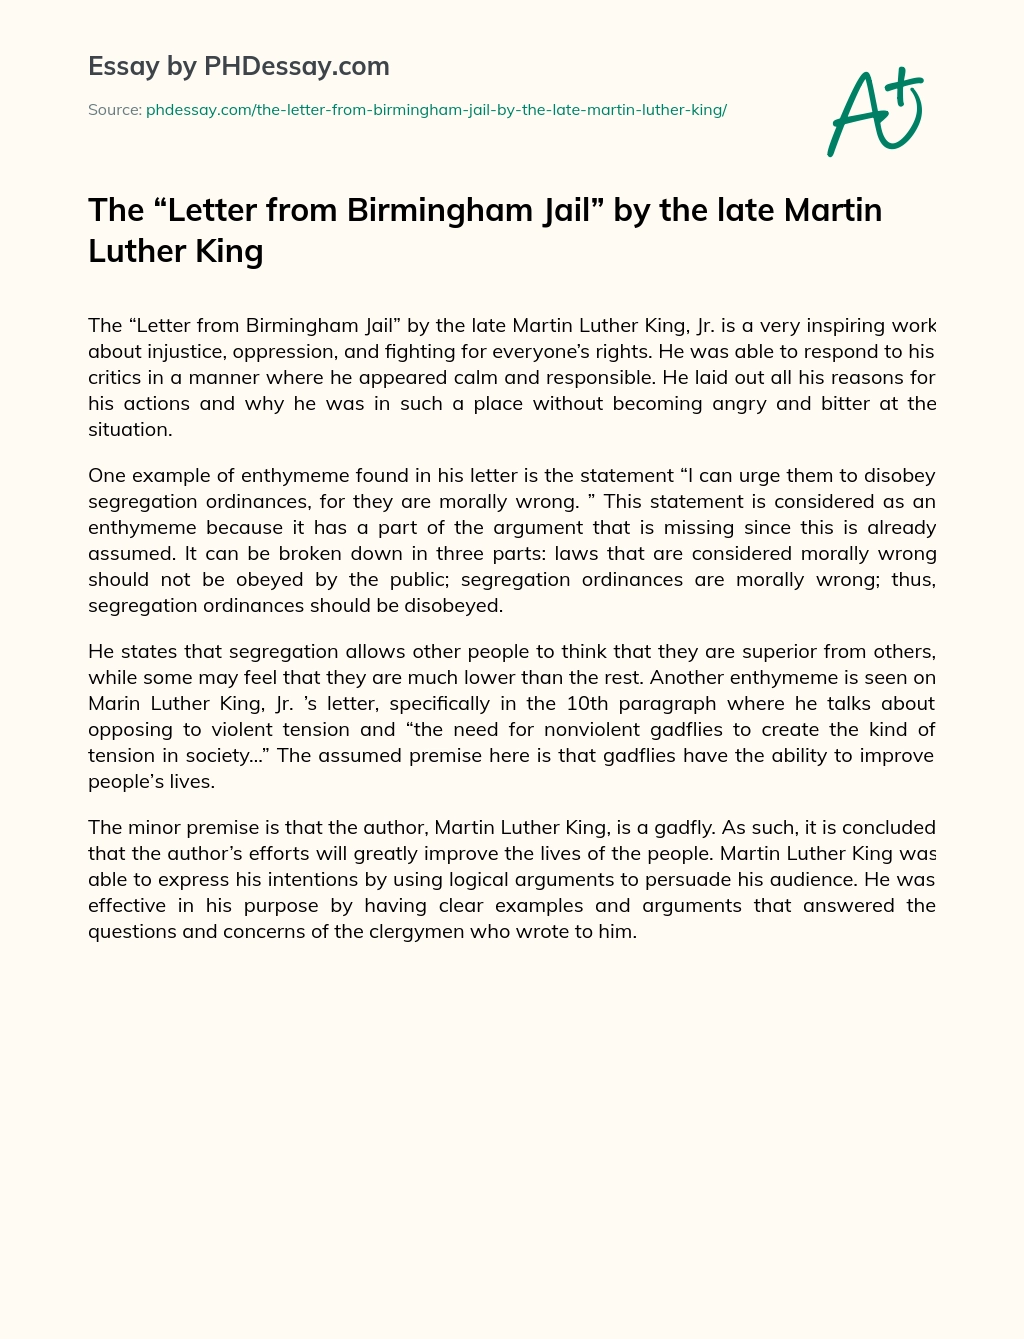 The “Letter from Birmingham Jail” by the late Martin Luther King essay